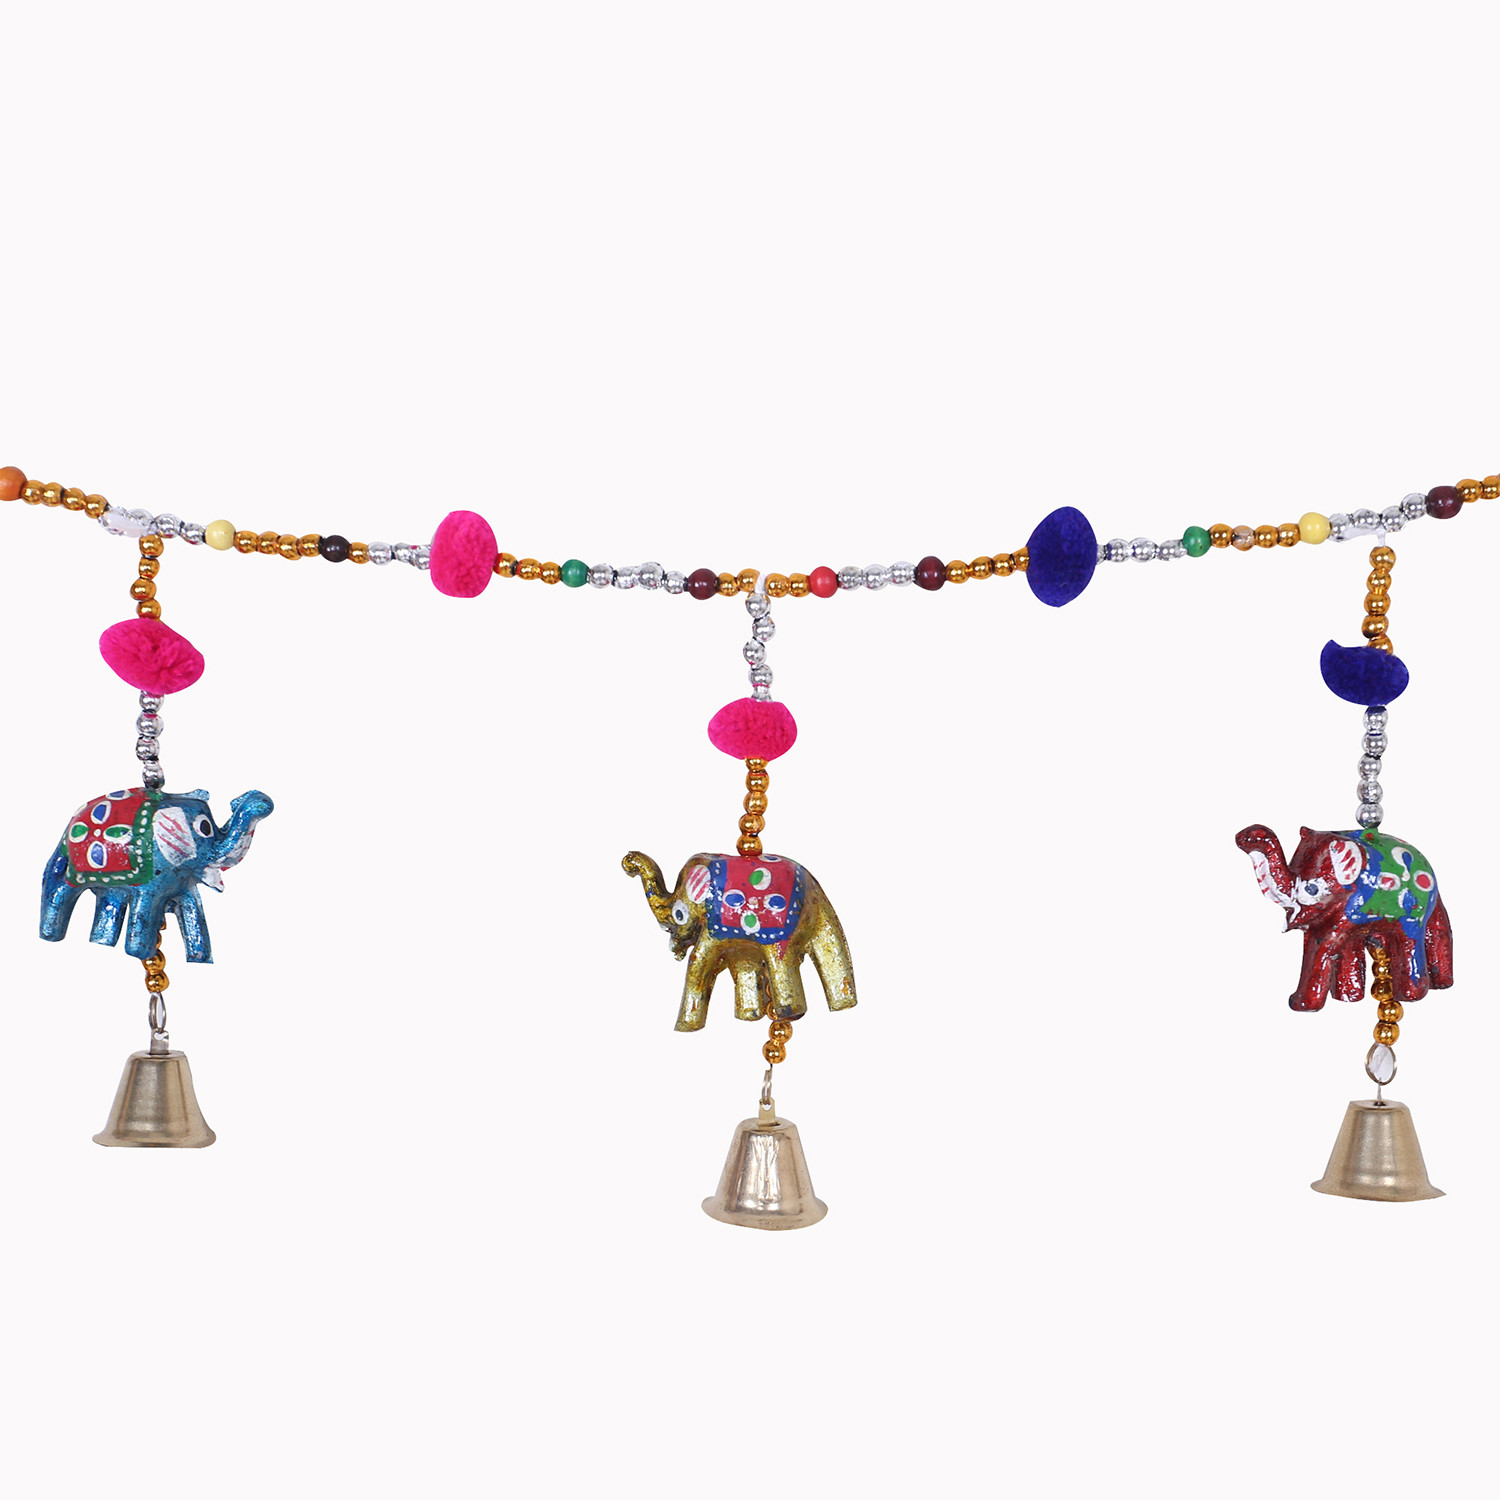 Kuber Industries Bandarwal | PVC Handcrafted Latkan | Wind Chimes for Home Décor | 7 Elephants & Bells Design | Handcrafted Bandarwal | Multi